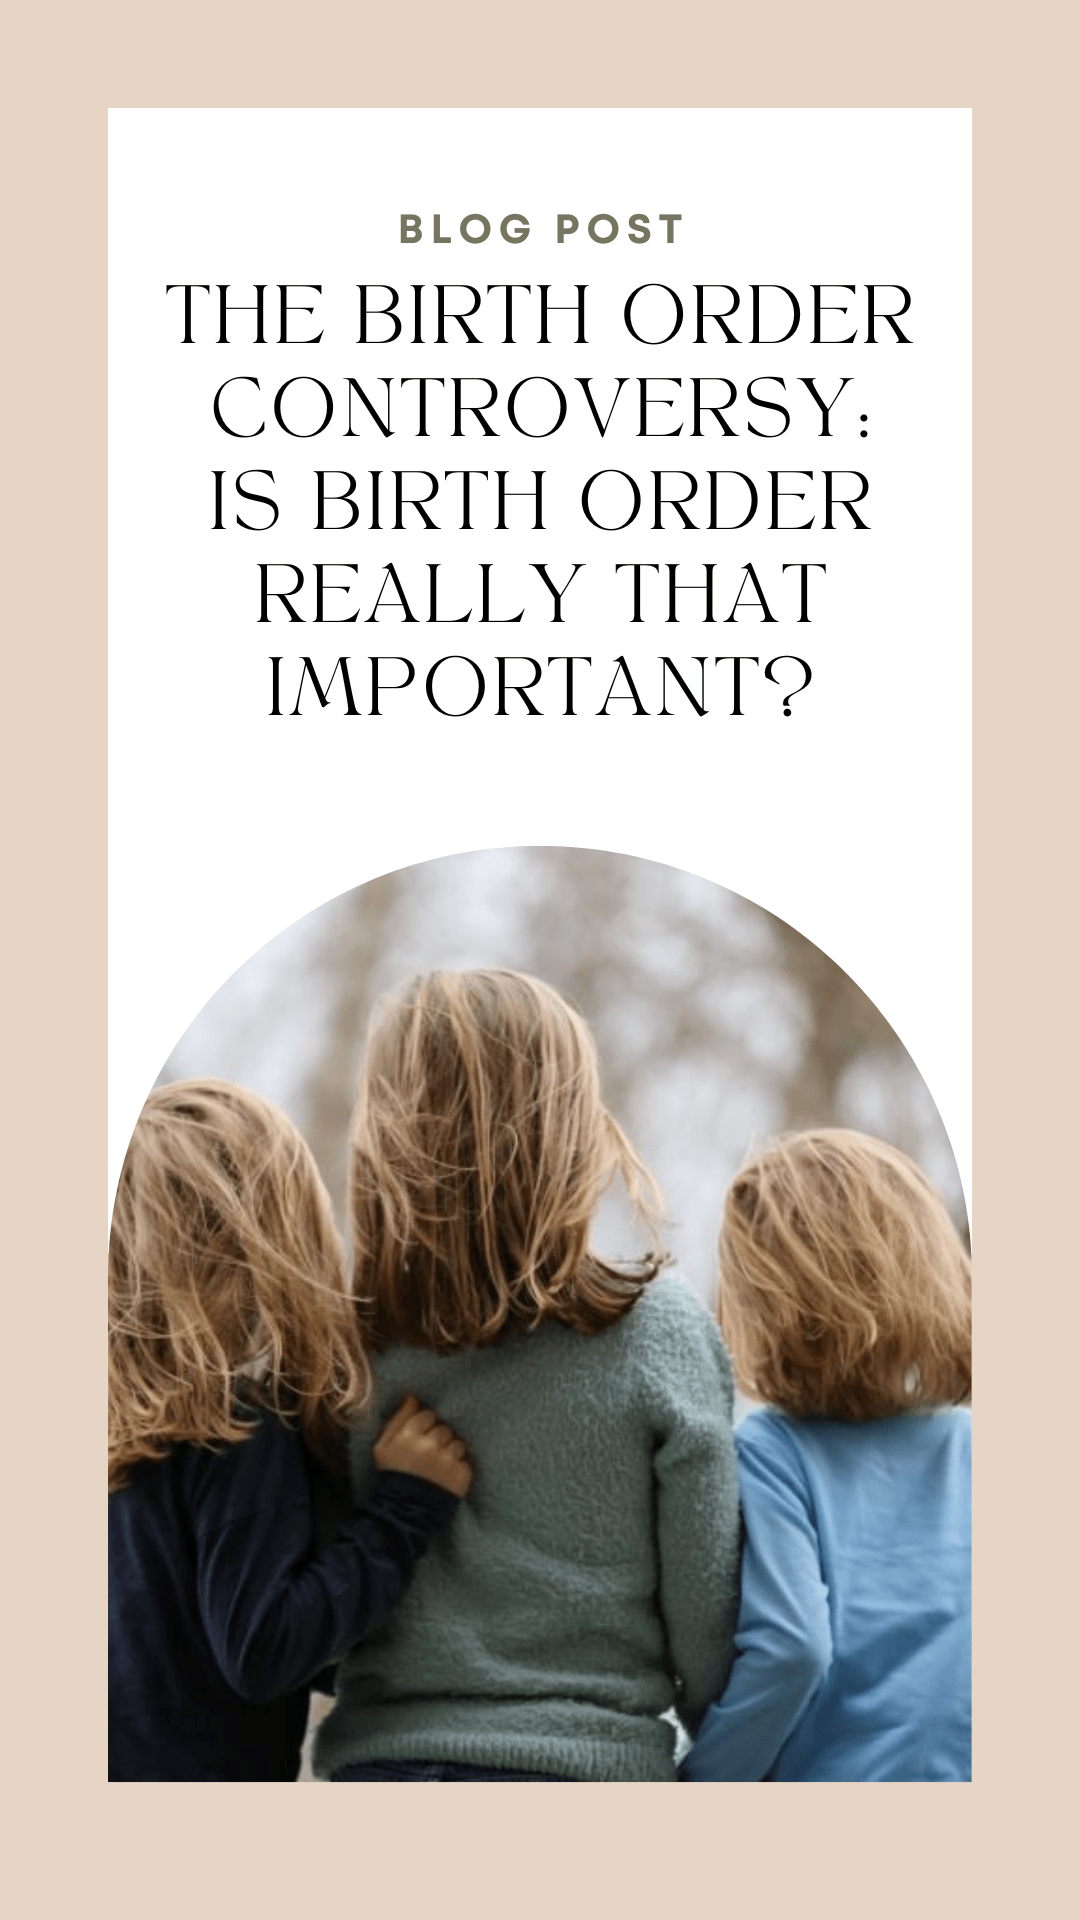 The Birth Order Controversy: Is Birth Order Really That Important?